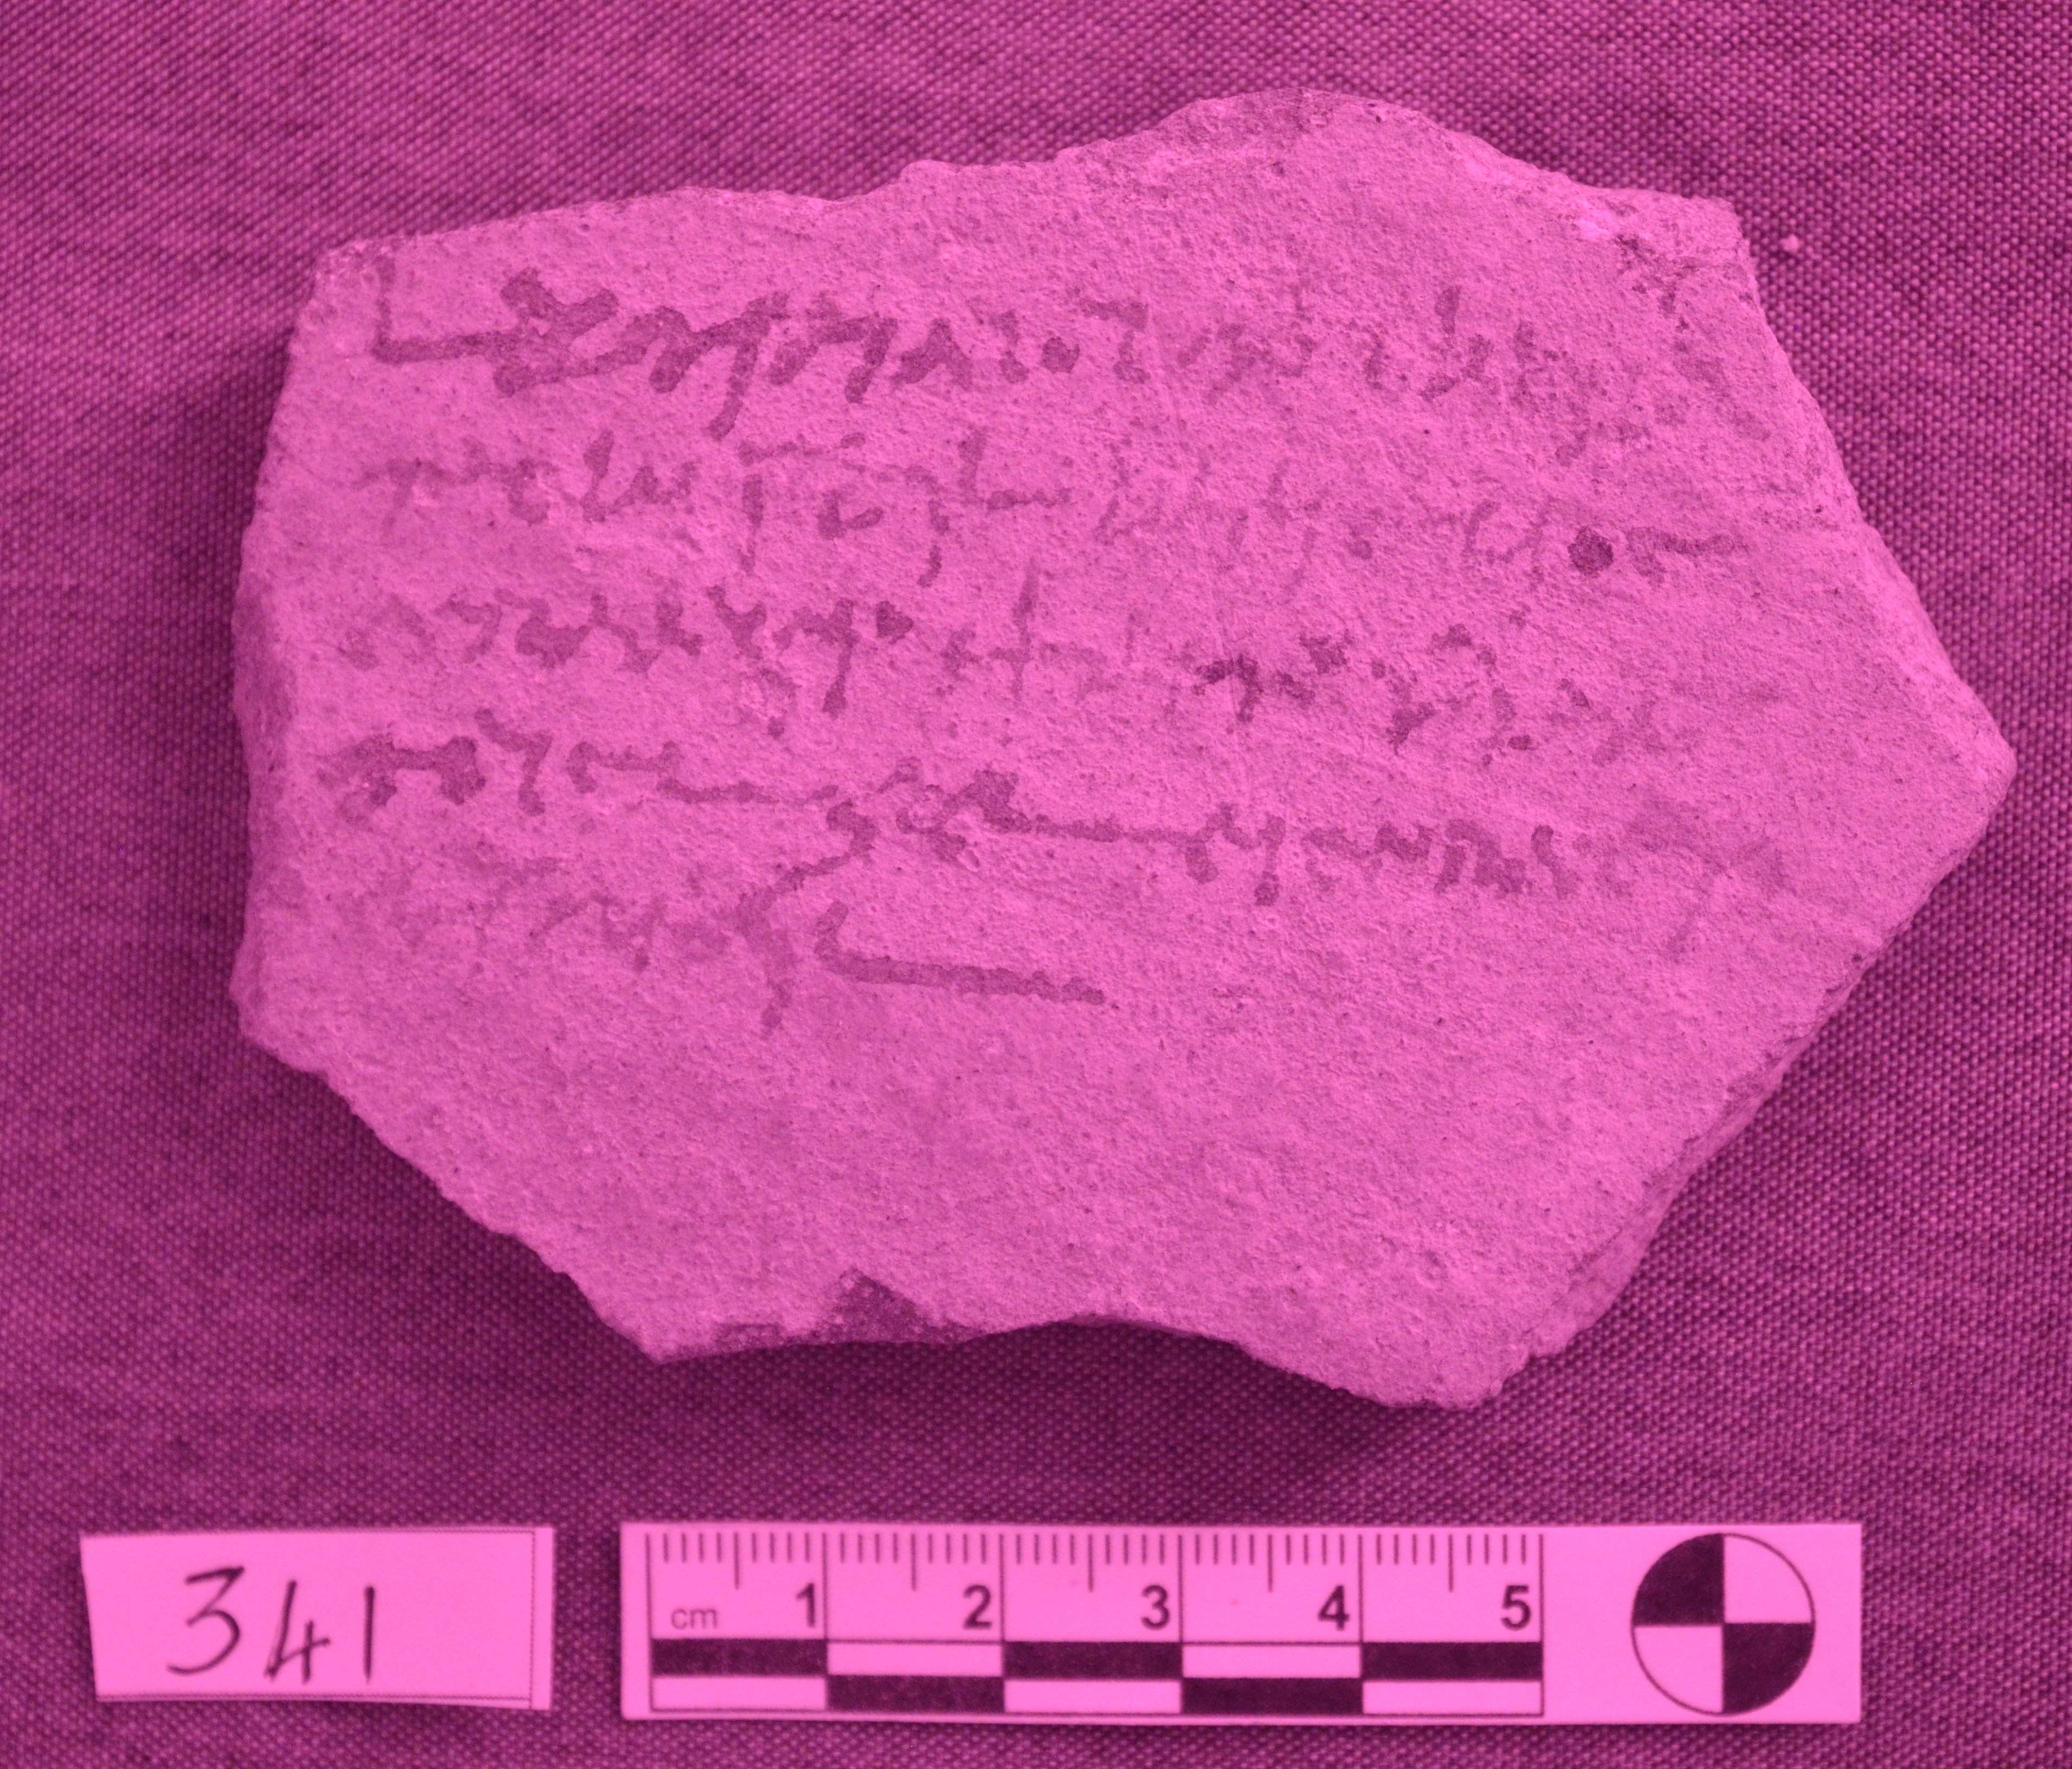 Infrared image of ostracon